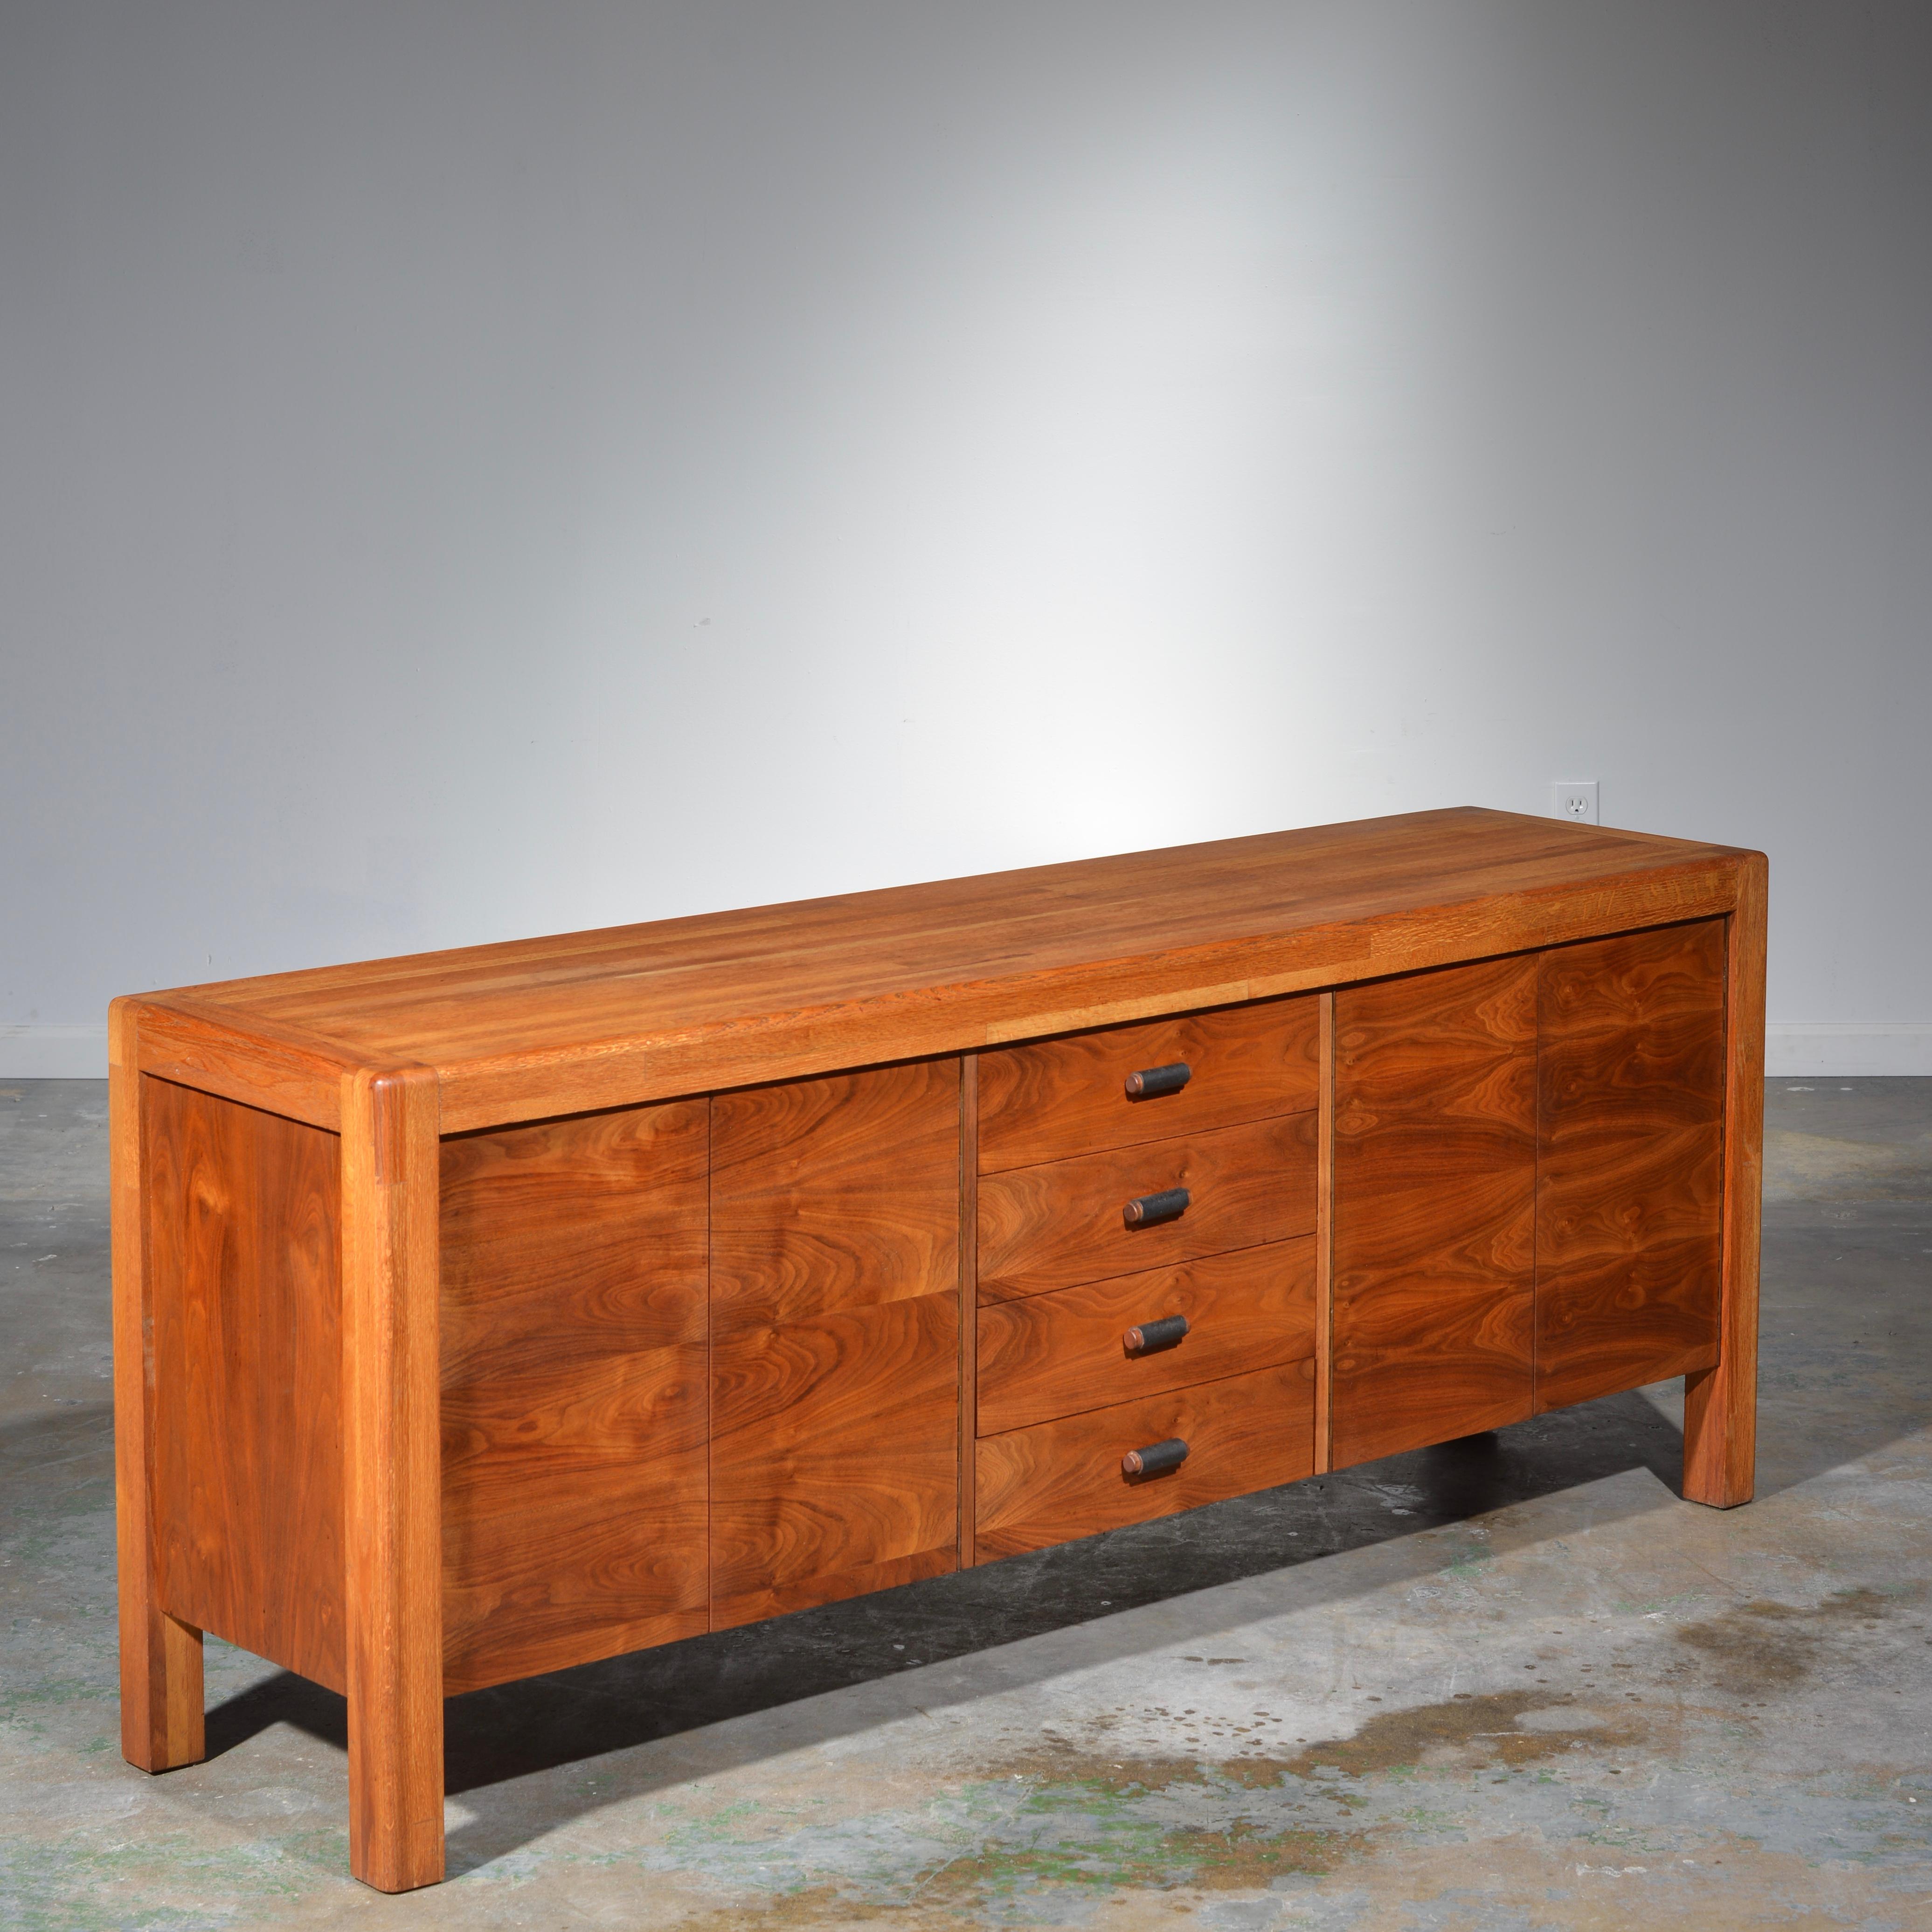 This is an amazing a very rare credenza by the great California designer Lou Hodges. Handcrafted in oak butcher block and walnut casing. In excellent condition. Makers mark located on the inside of casement door.